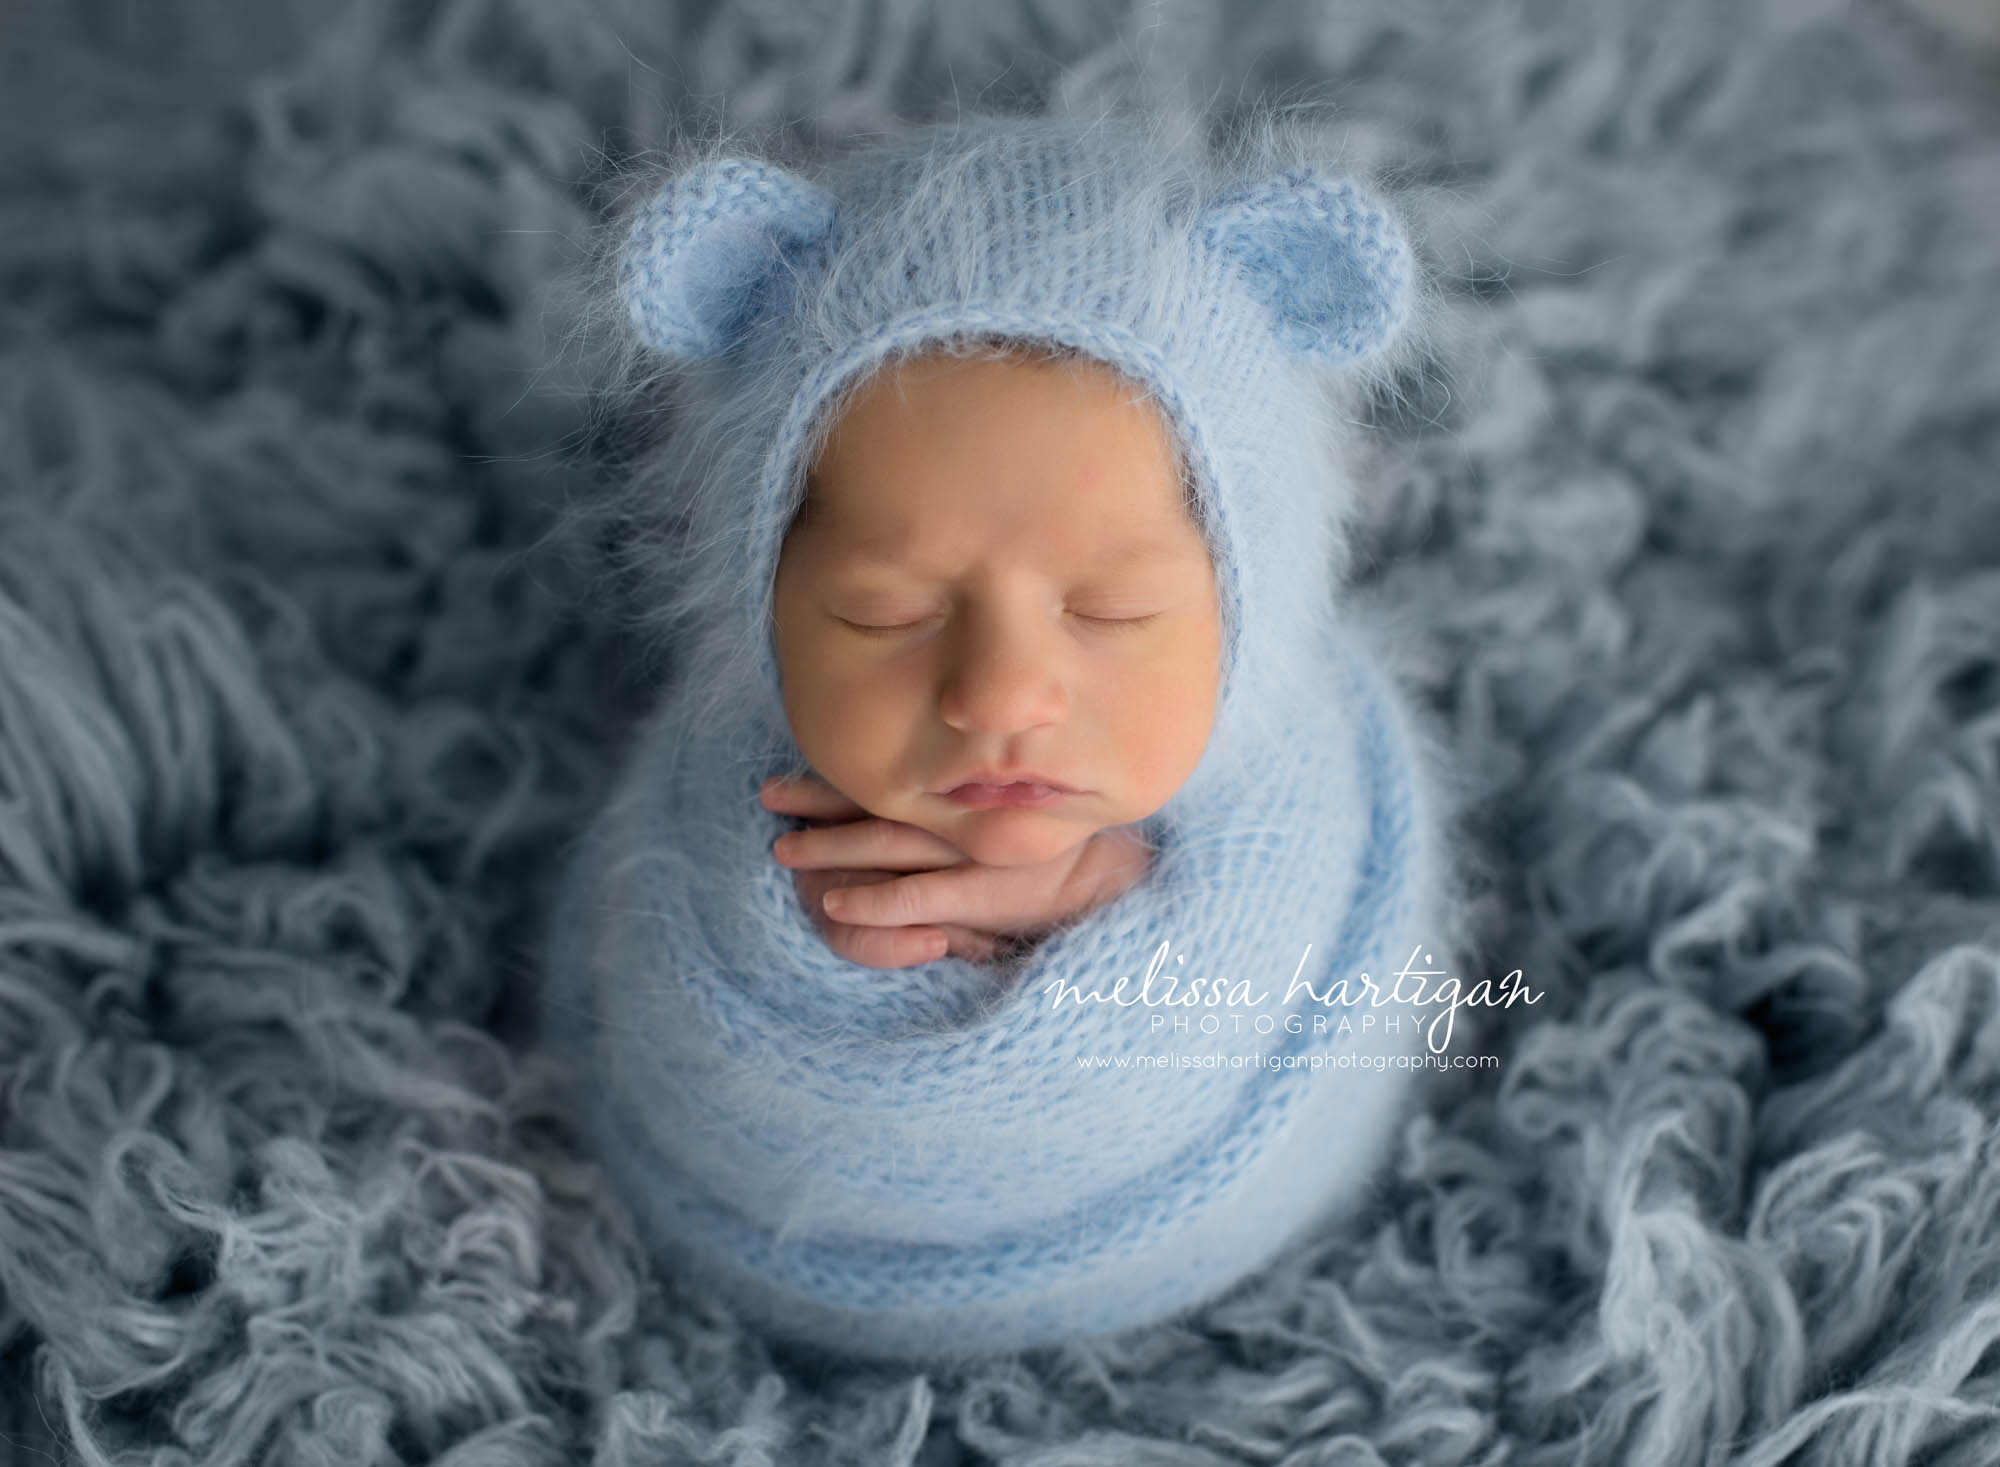 Melissa Hartigan Photography Maternity and Newborn Connecticut Photographer Brayden Mini Newborn Session Baby boy wrapped in blue knit blanket sleeping on a blue flokati hands sticking out wearing blue knit hat with ears